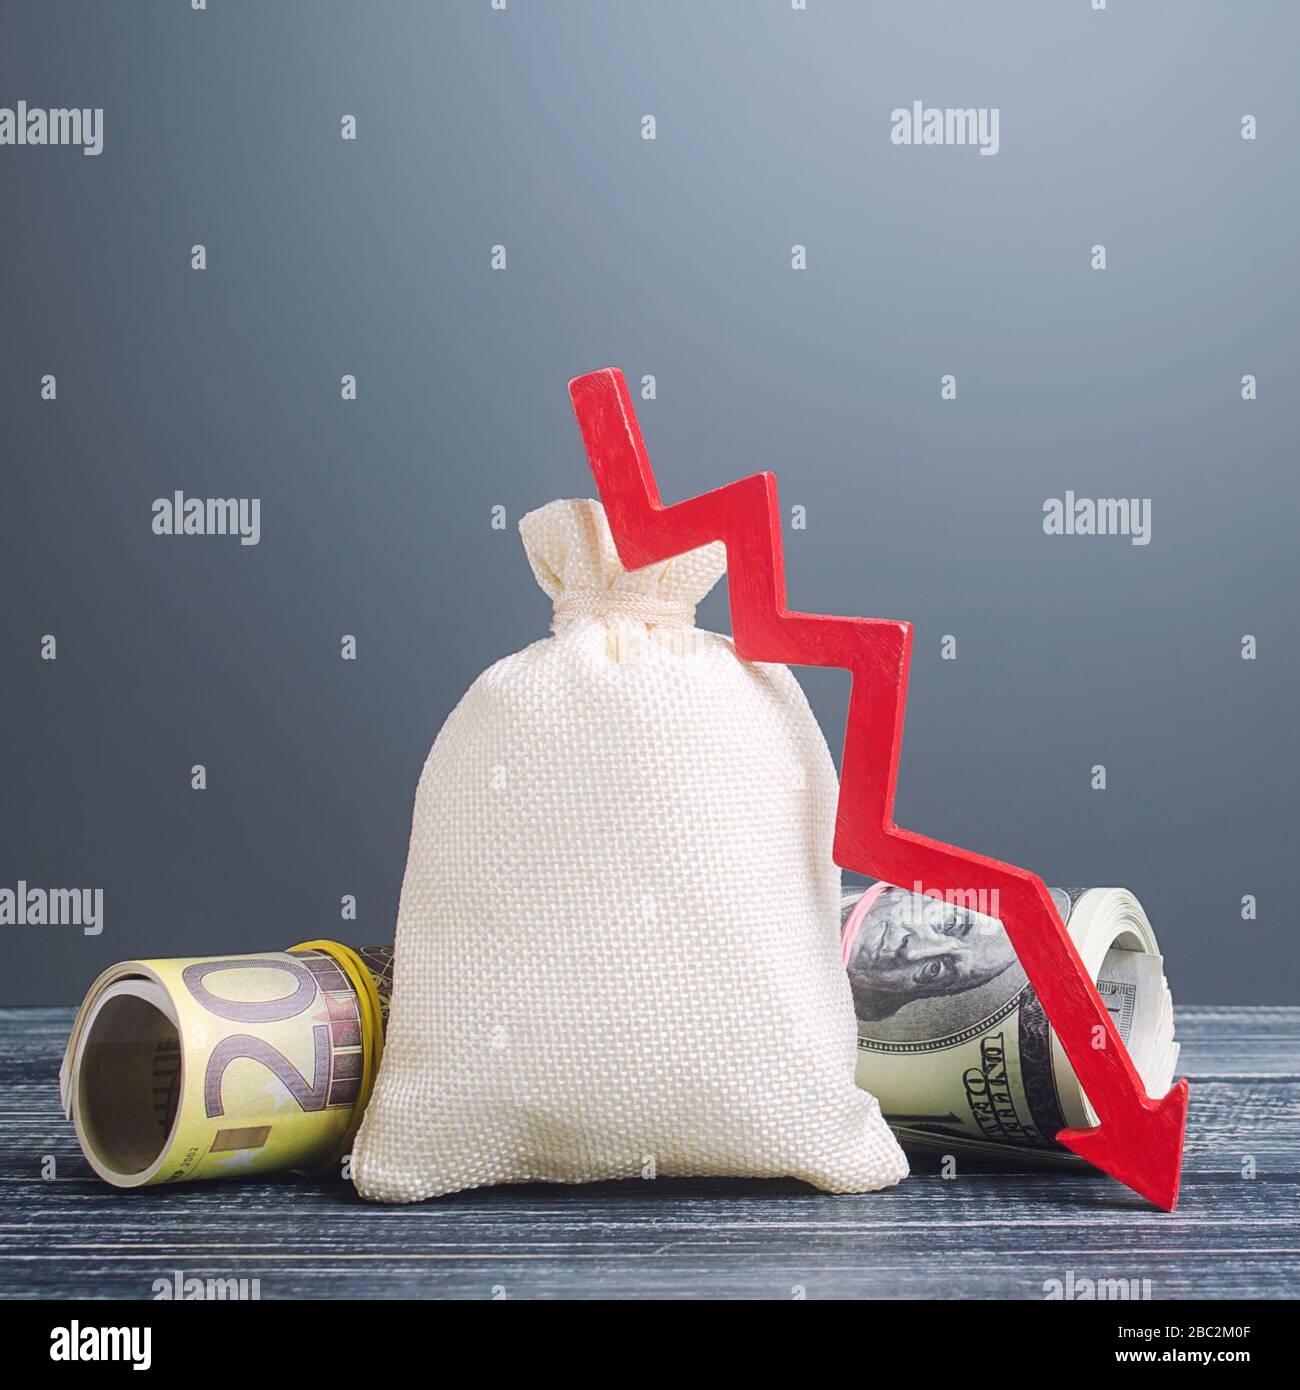 Big money bag and red arrow down. Economic difficulties. Capital flight, high risks. Costs expenses. Stagnation, declining business activity, falling Stock Photo